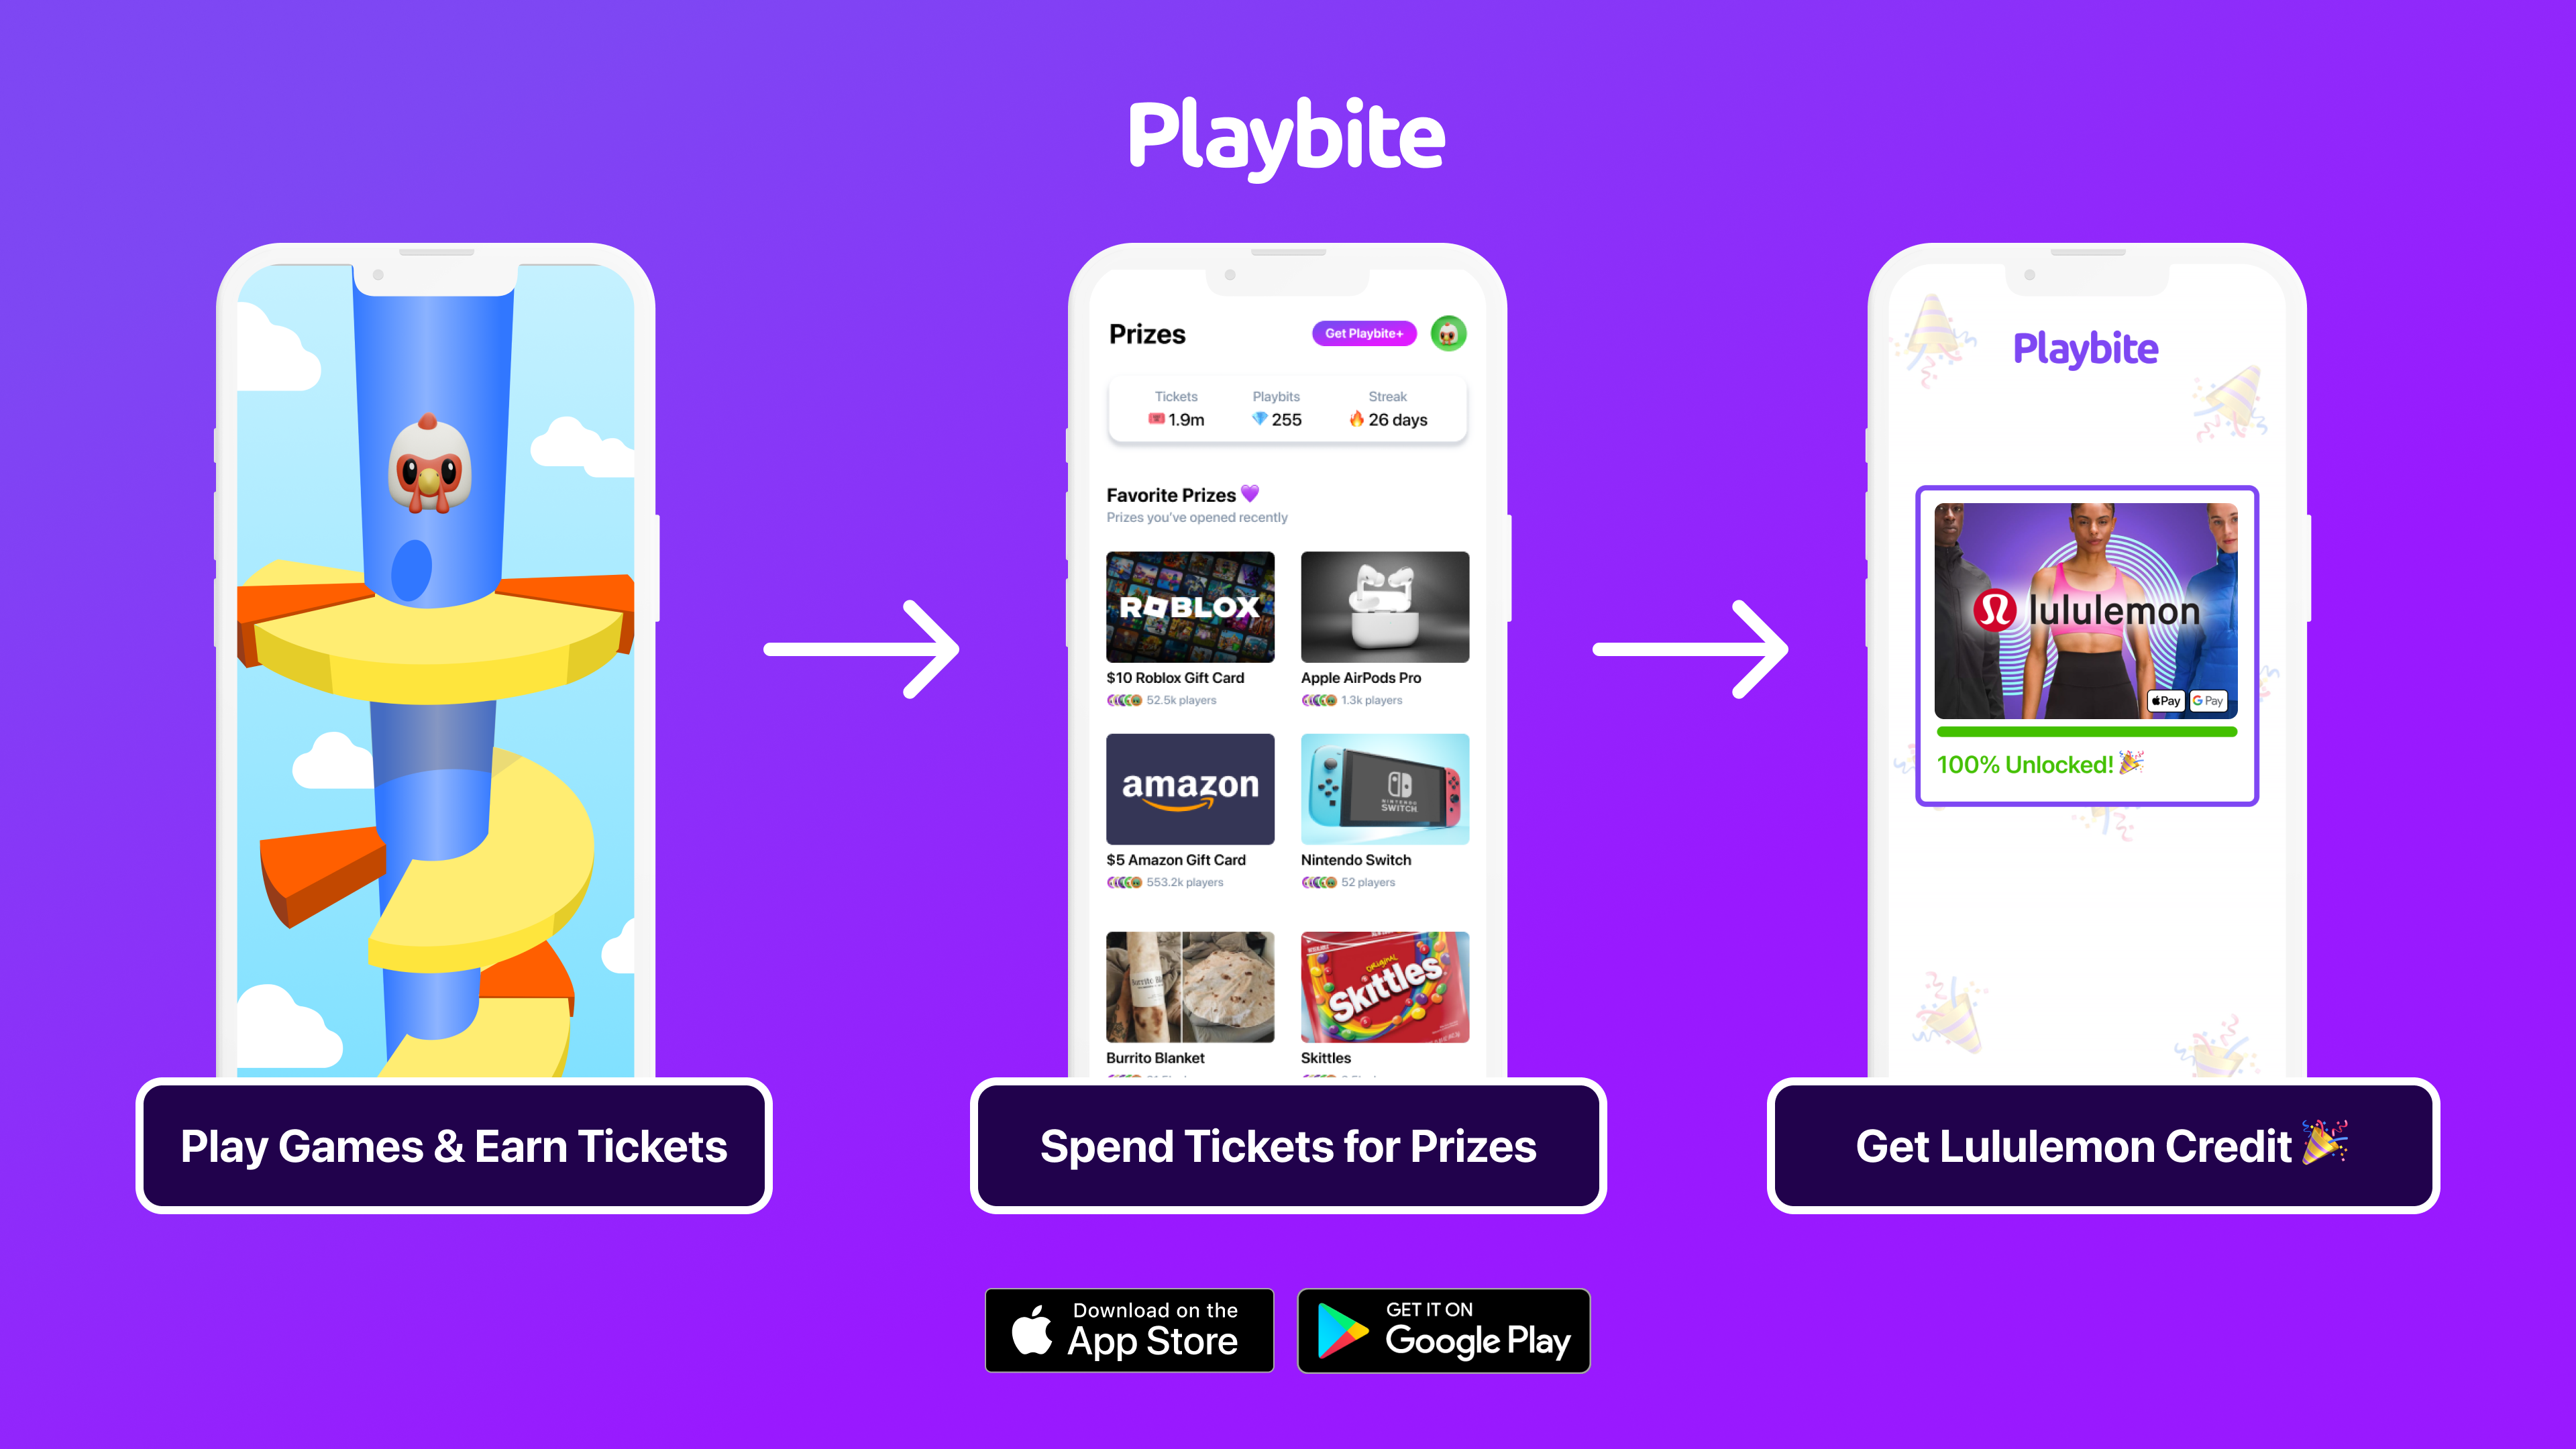 Win Lululemon credit by playing games on Playbite